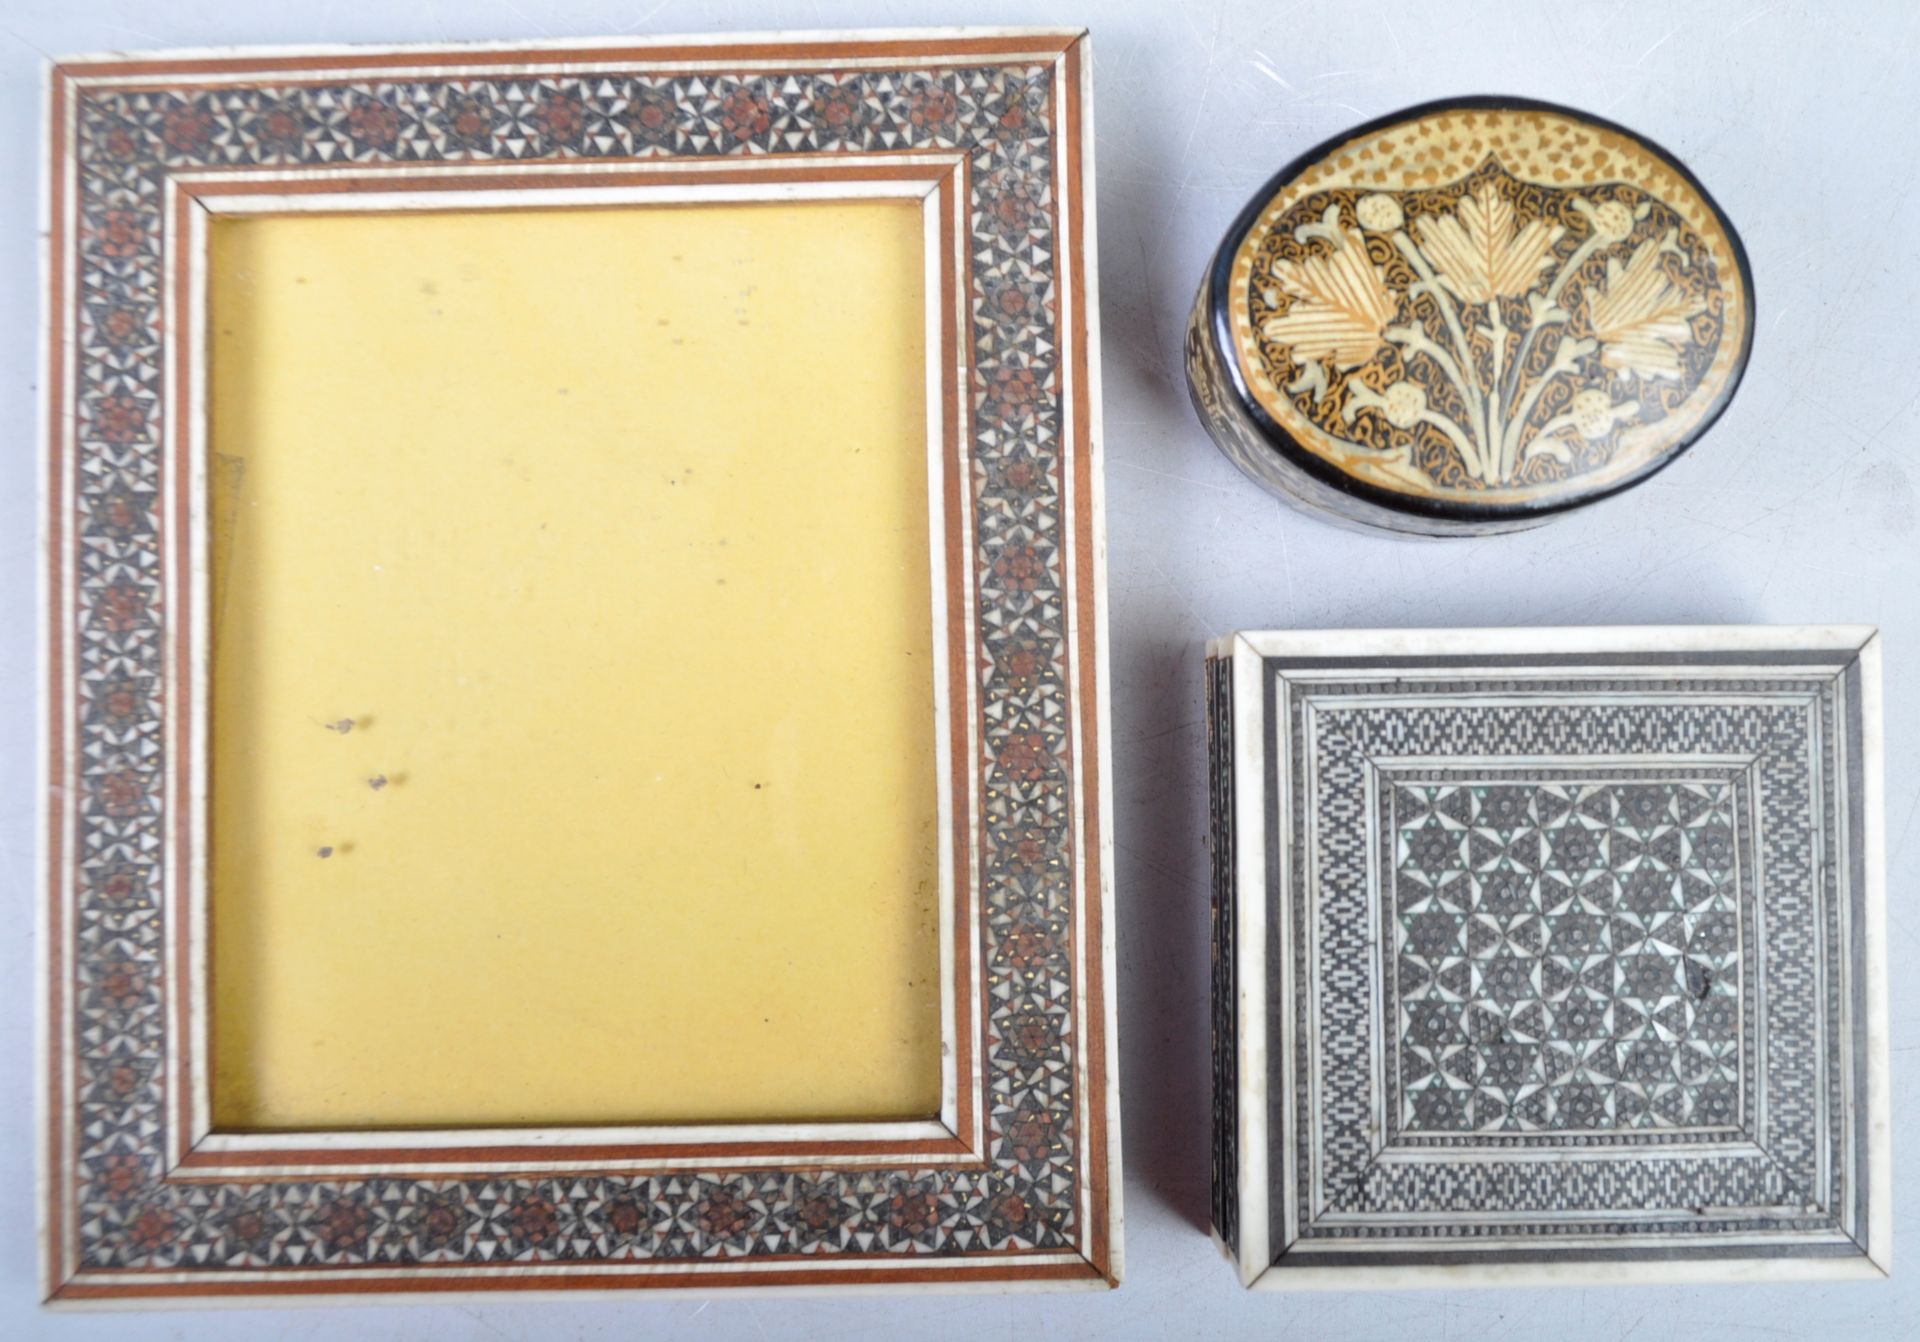 COLLECTION OF INDIAN ANTIQUE VIZAGAPATAM IVORY ITEMS